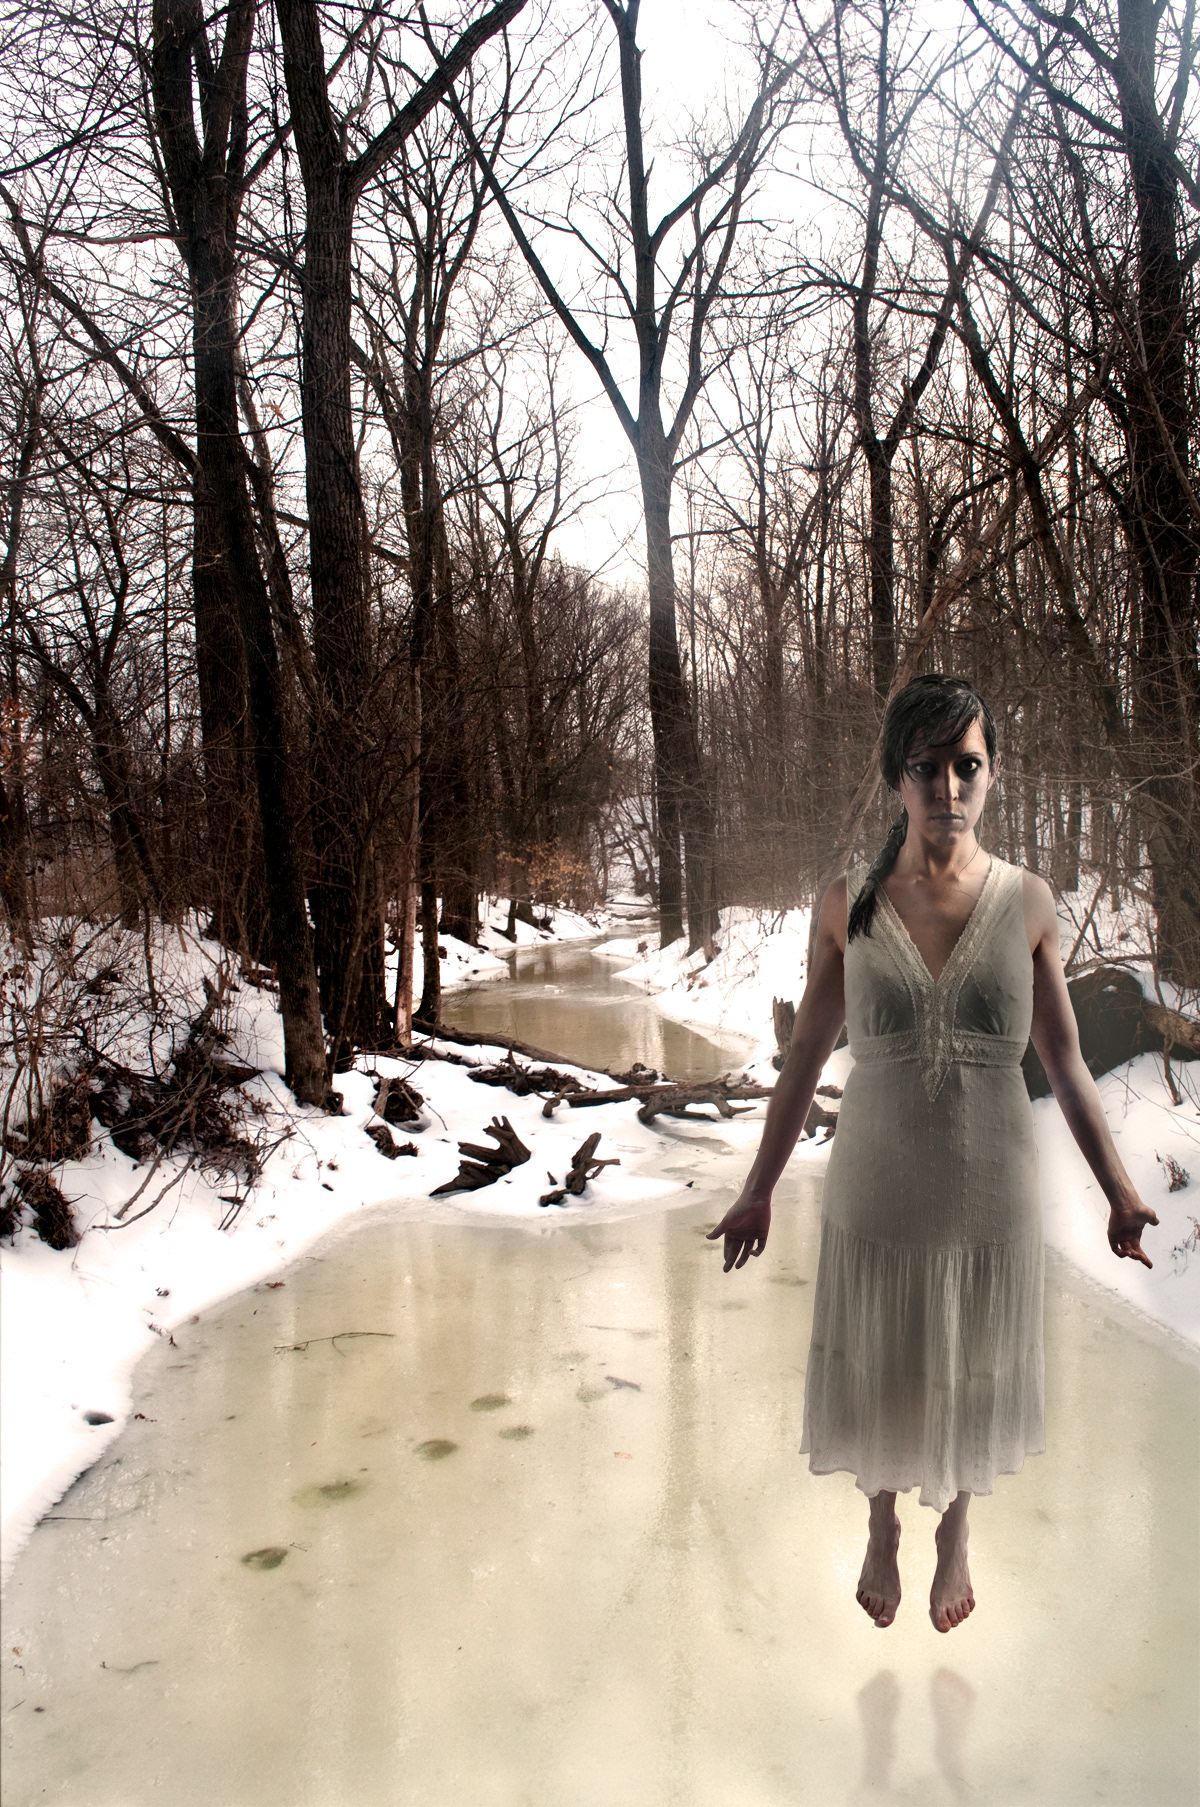 #composite #photography #digital   #digitalphoto #ghost #floating #dead #hitchiking